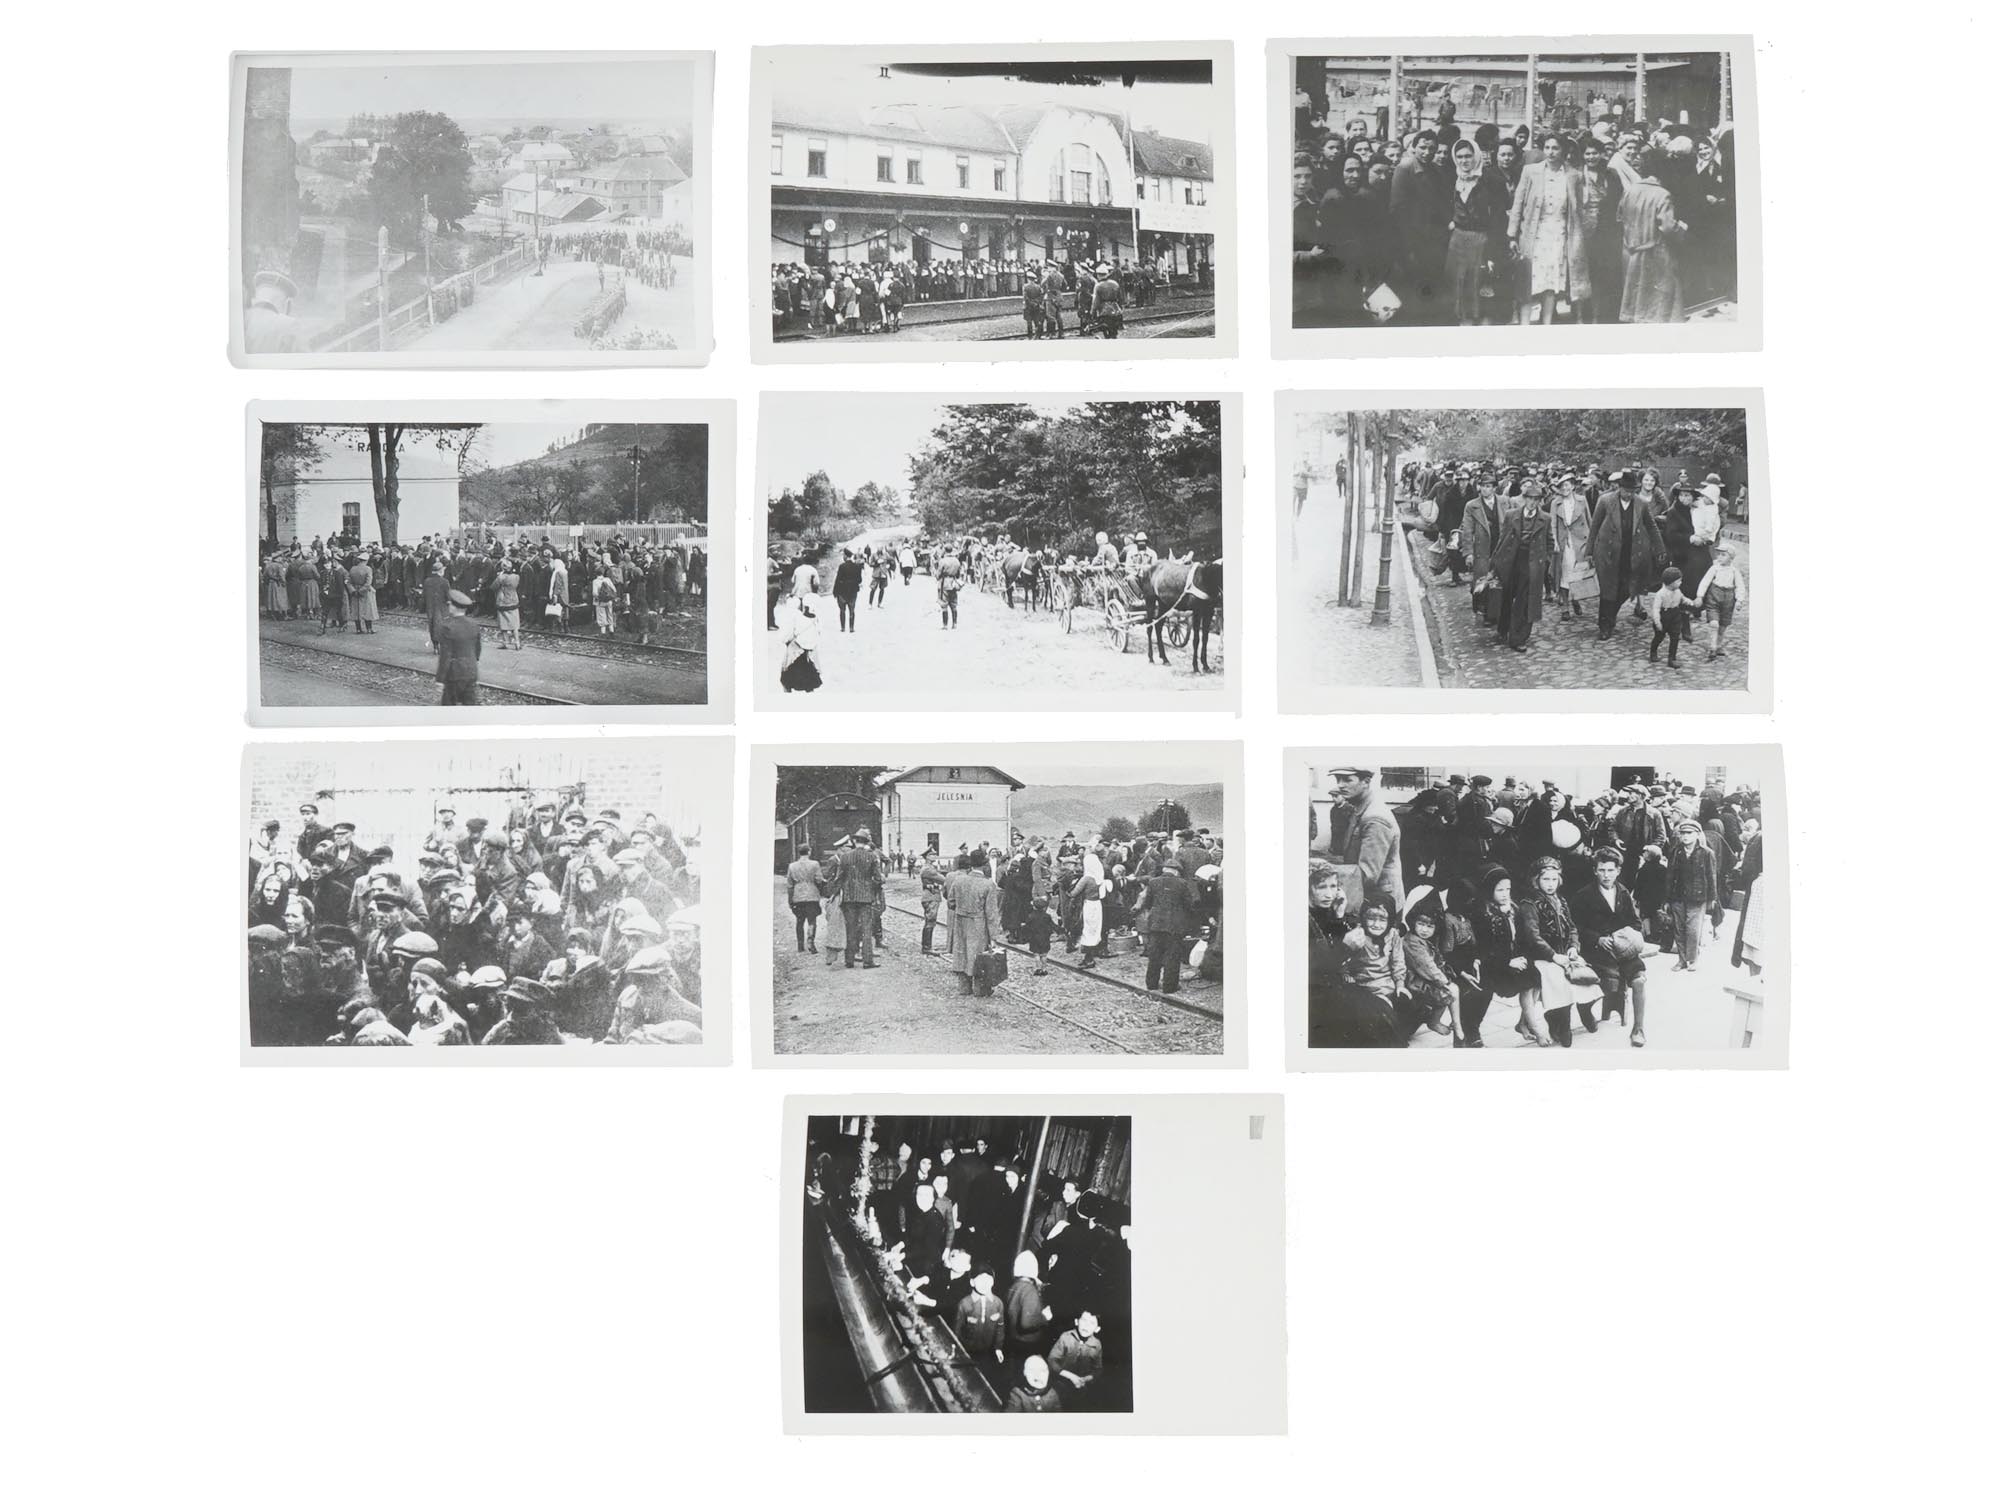 GROUP PHOTOS OF CONCENTRATION CAMPS POLISH ARCHIVES PIC-0